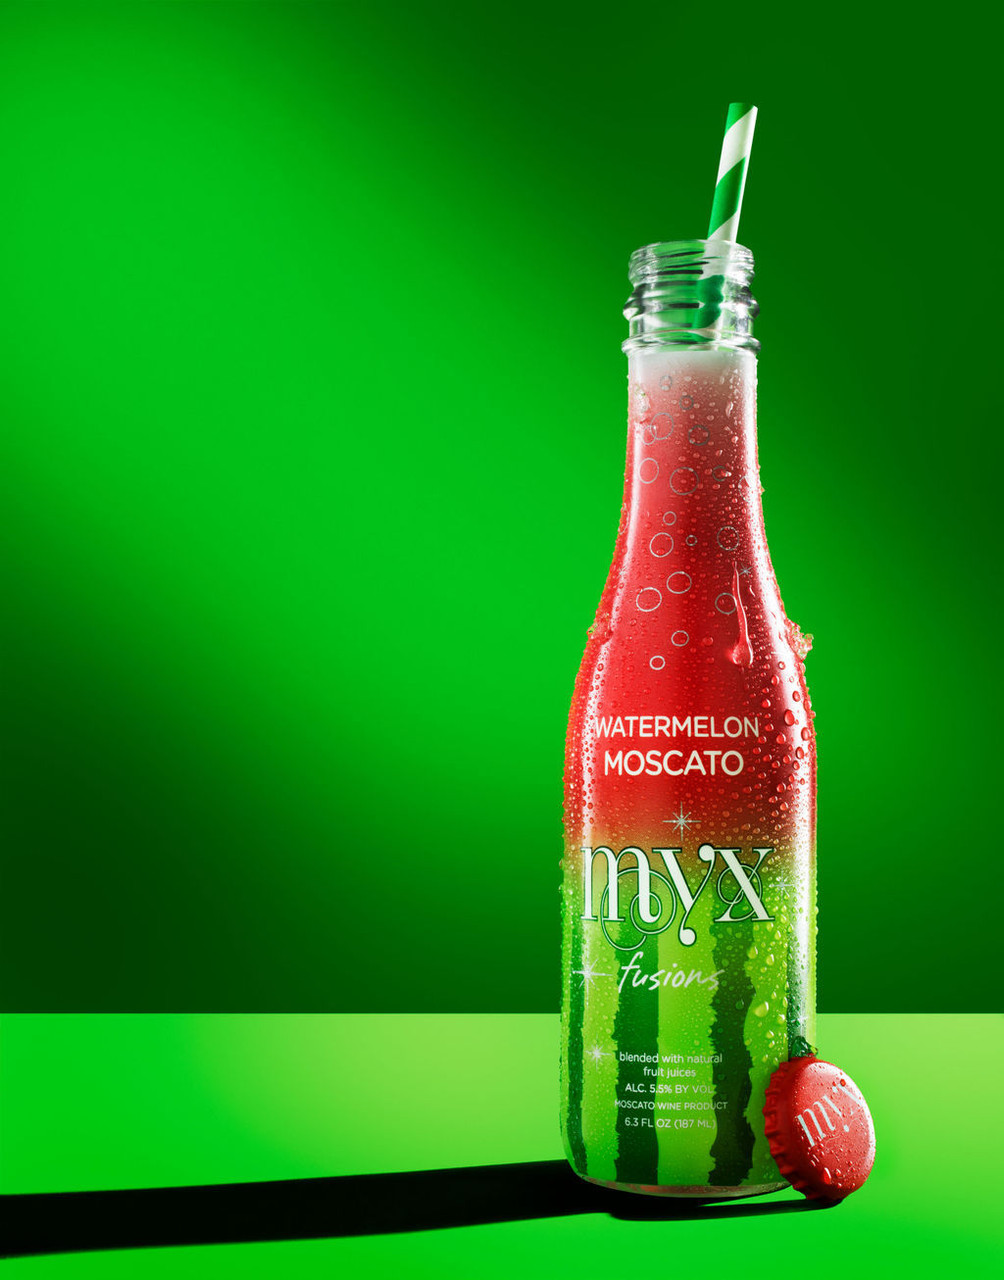 Watermelon Moscato Myx Fusions’ Low-Alcohol Wines for Mother's Day